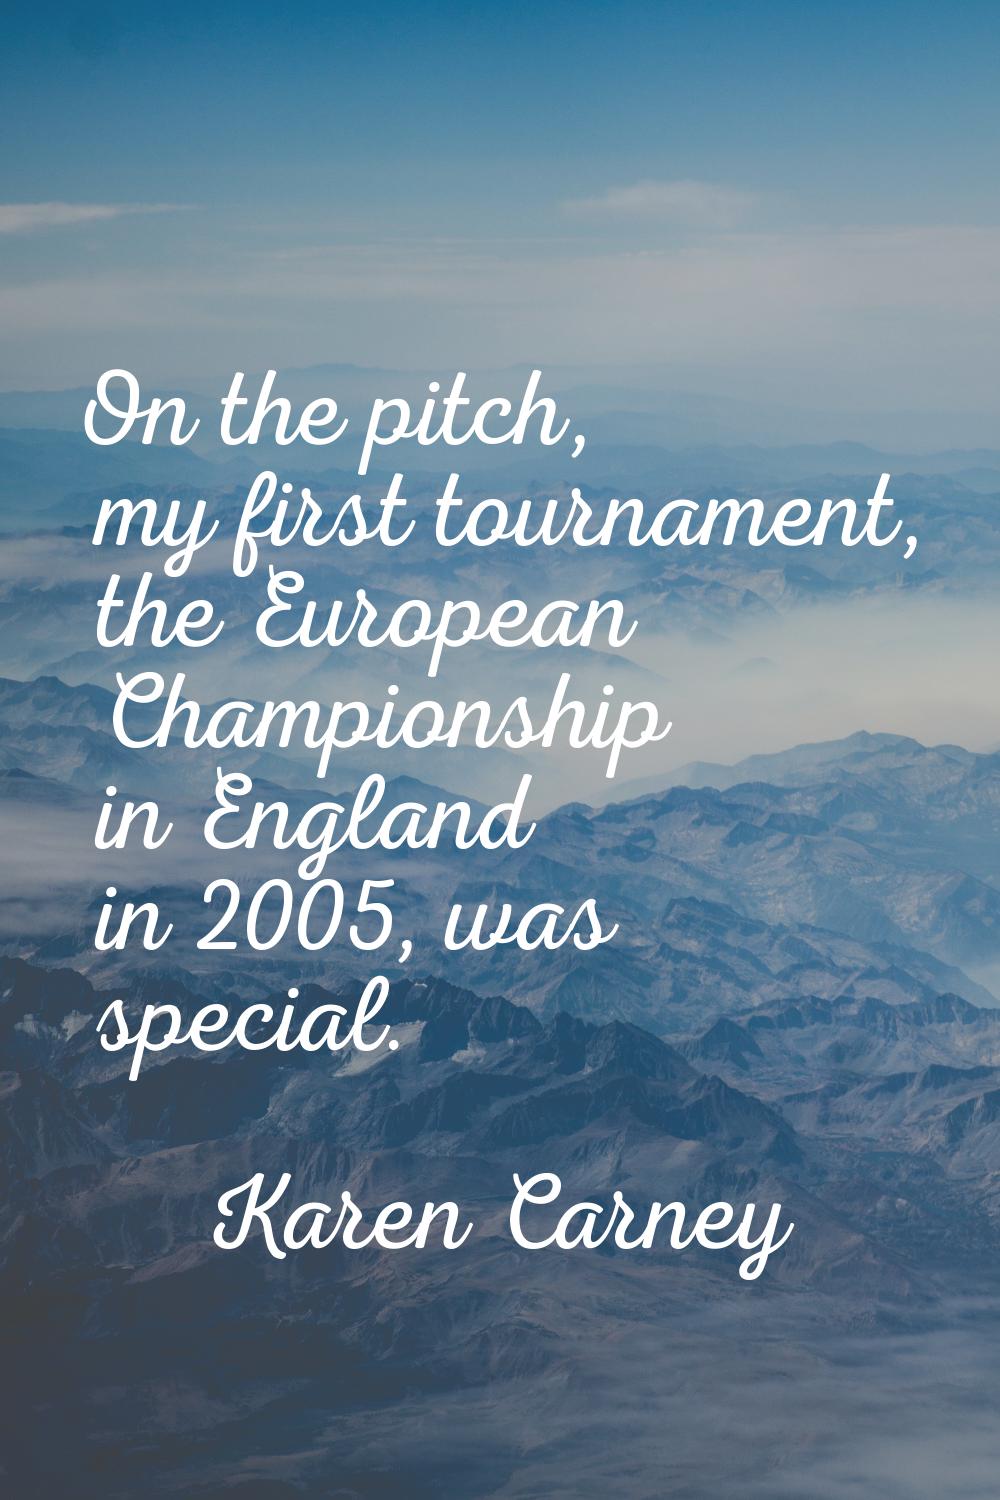 On the pitch, my first tournament, the European Championship in England in 2005, was special.